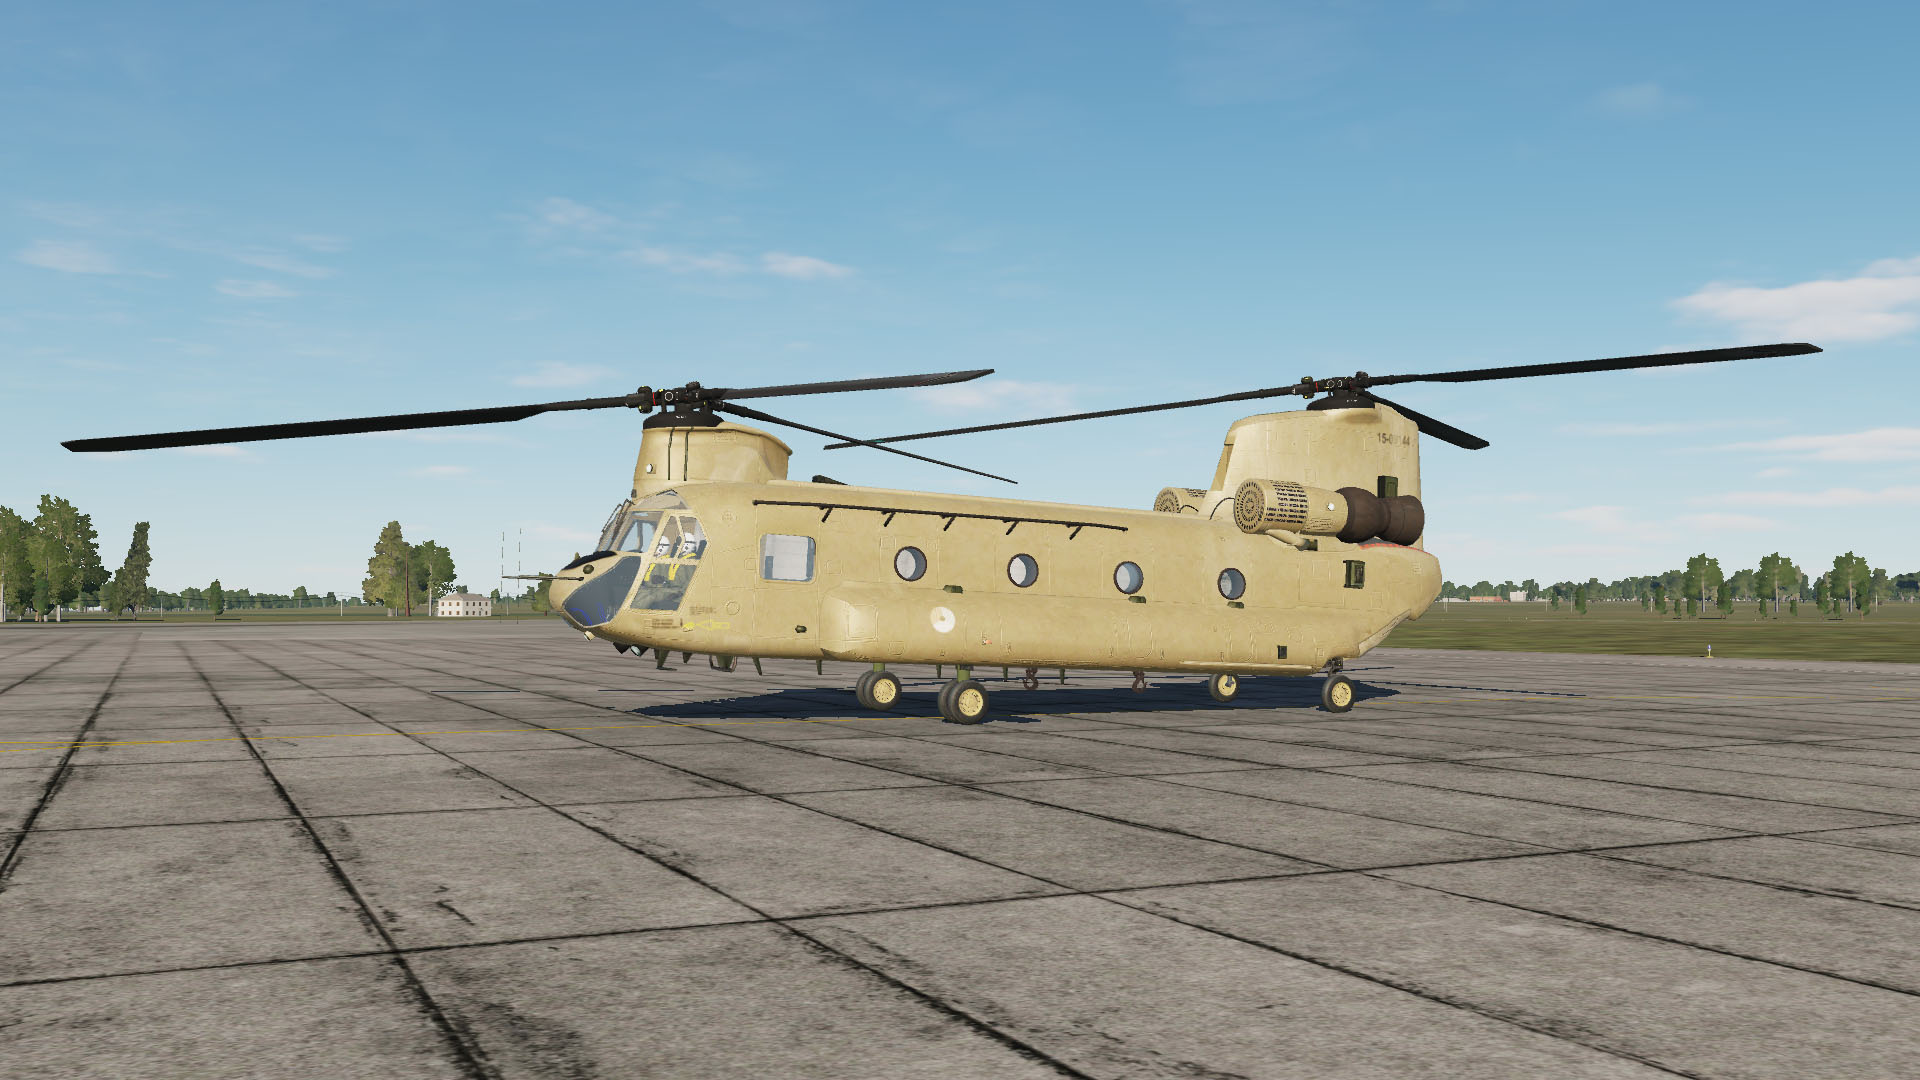 CH-47 Chinook - RNLAF livery